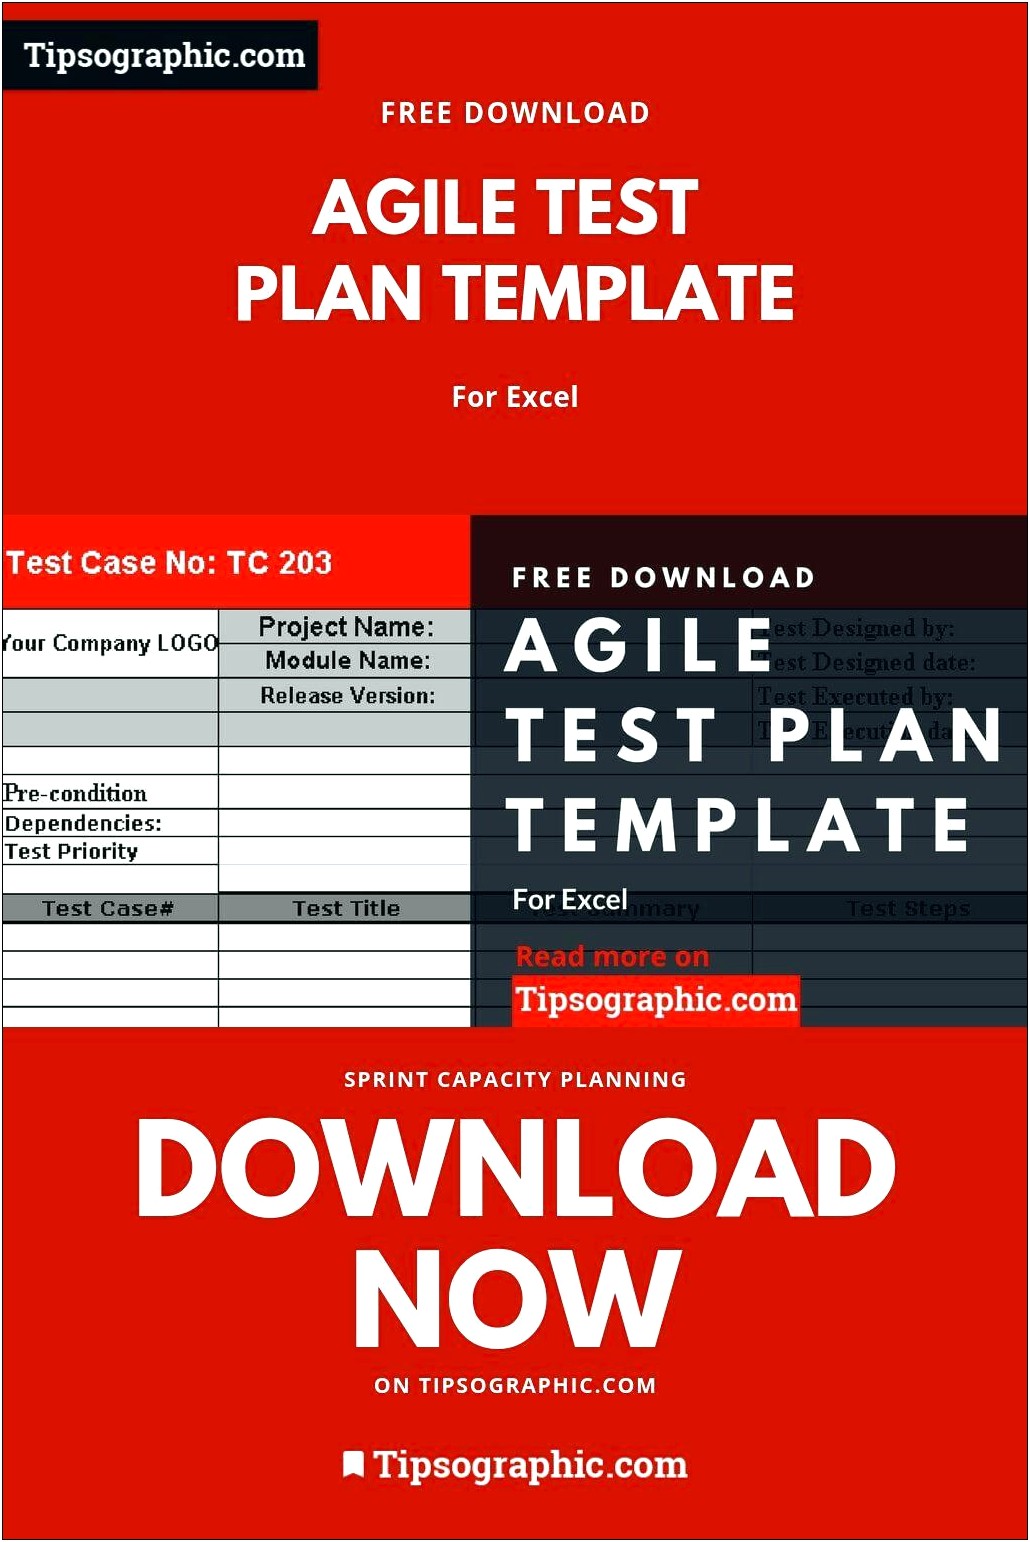 Test Plan Template Excel Free Download